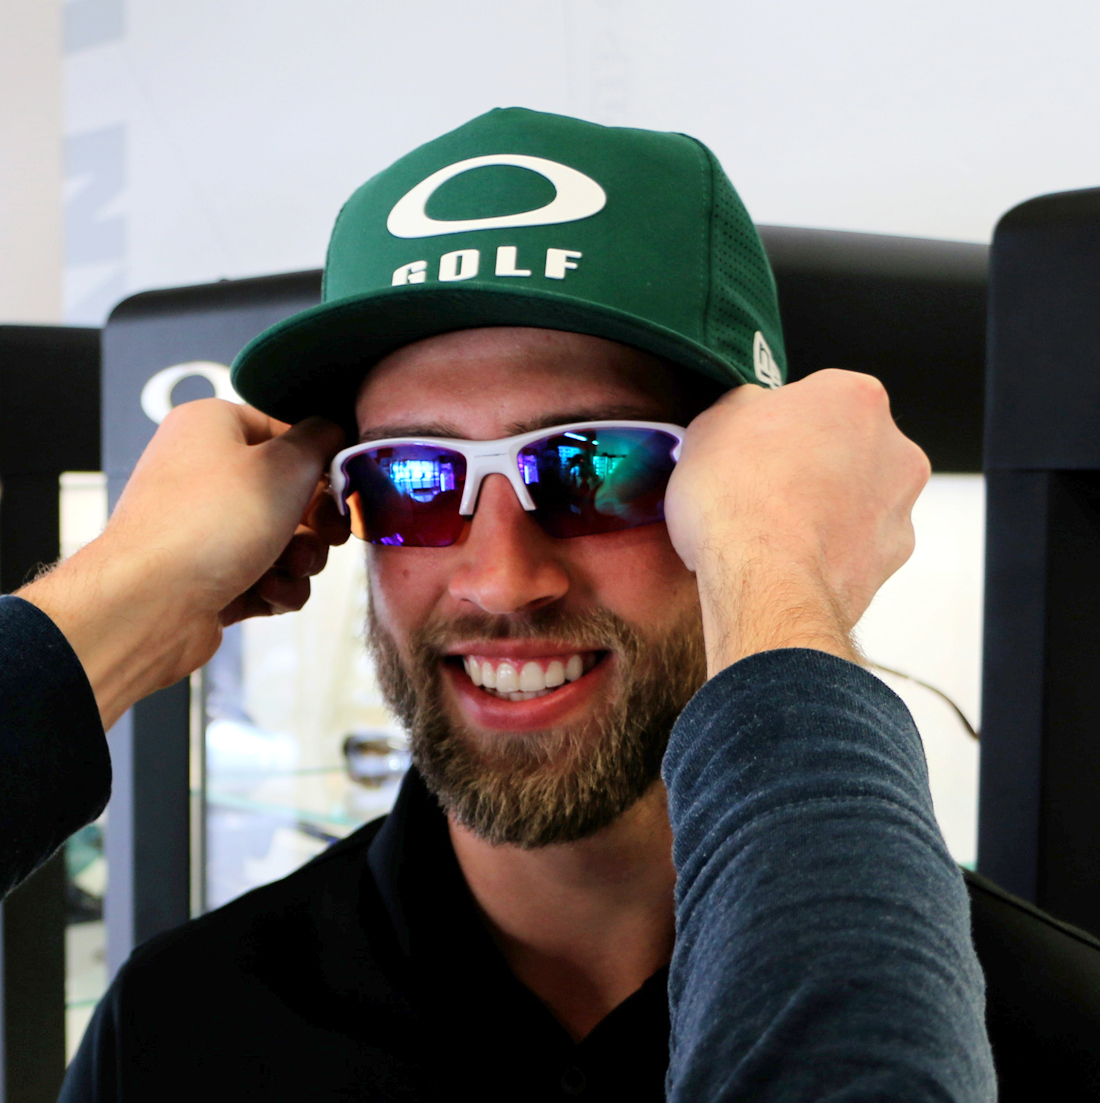 Ideal sunglasses for golfers -- including golfers who need glasses